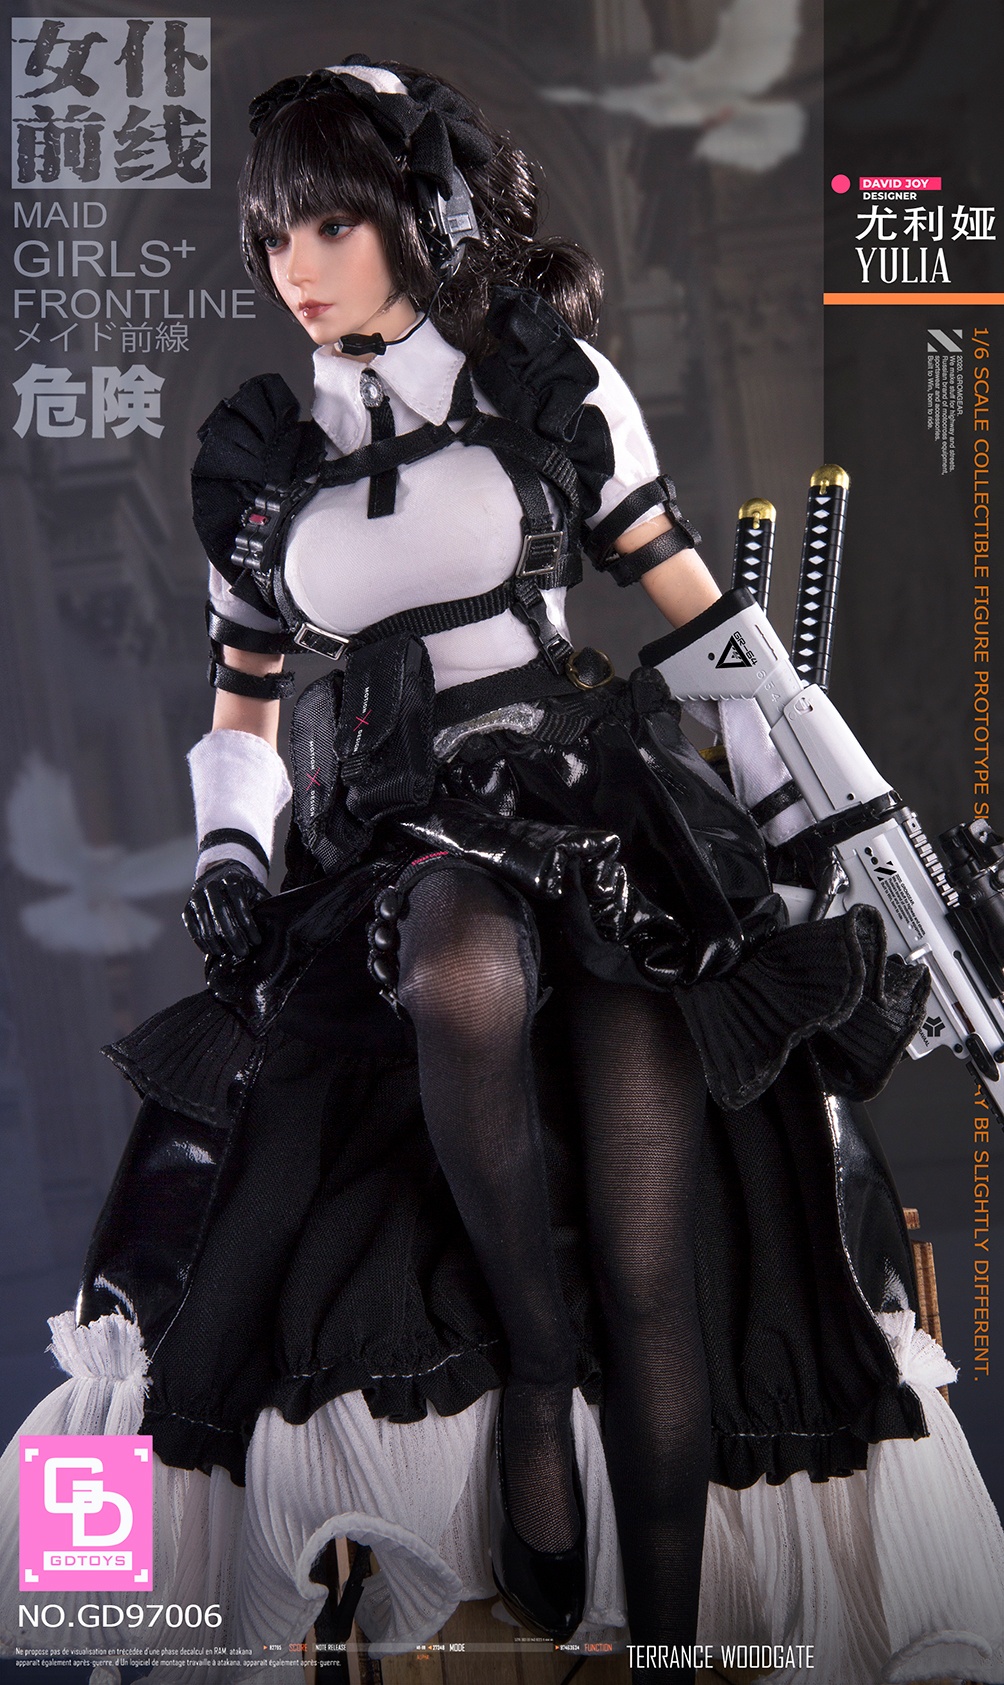 NEW PRODUCT: GDTOYS: GD97006 1/6 Scale Maid Girls+ Frontline - YULIA 22563911